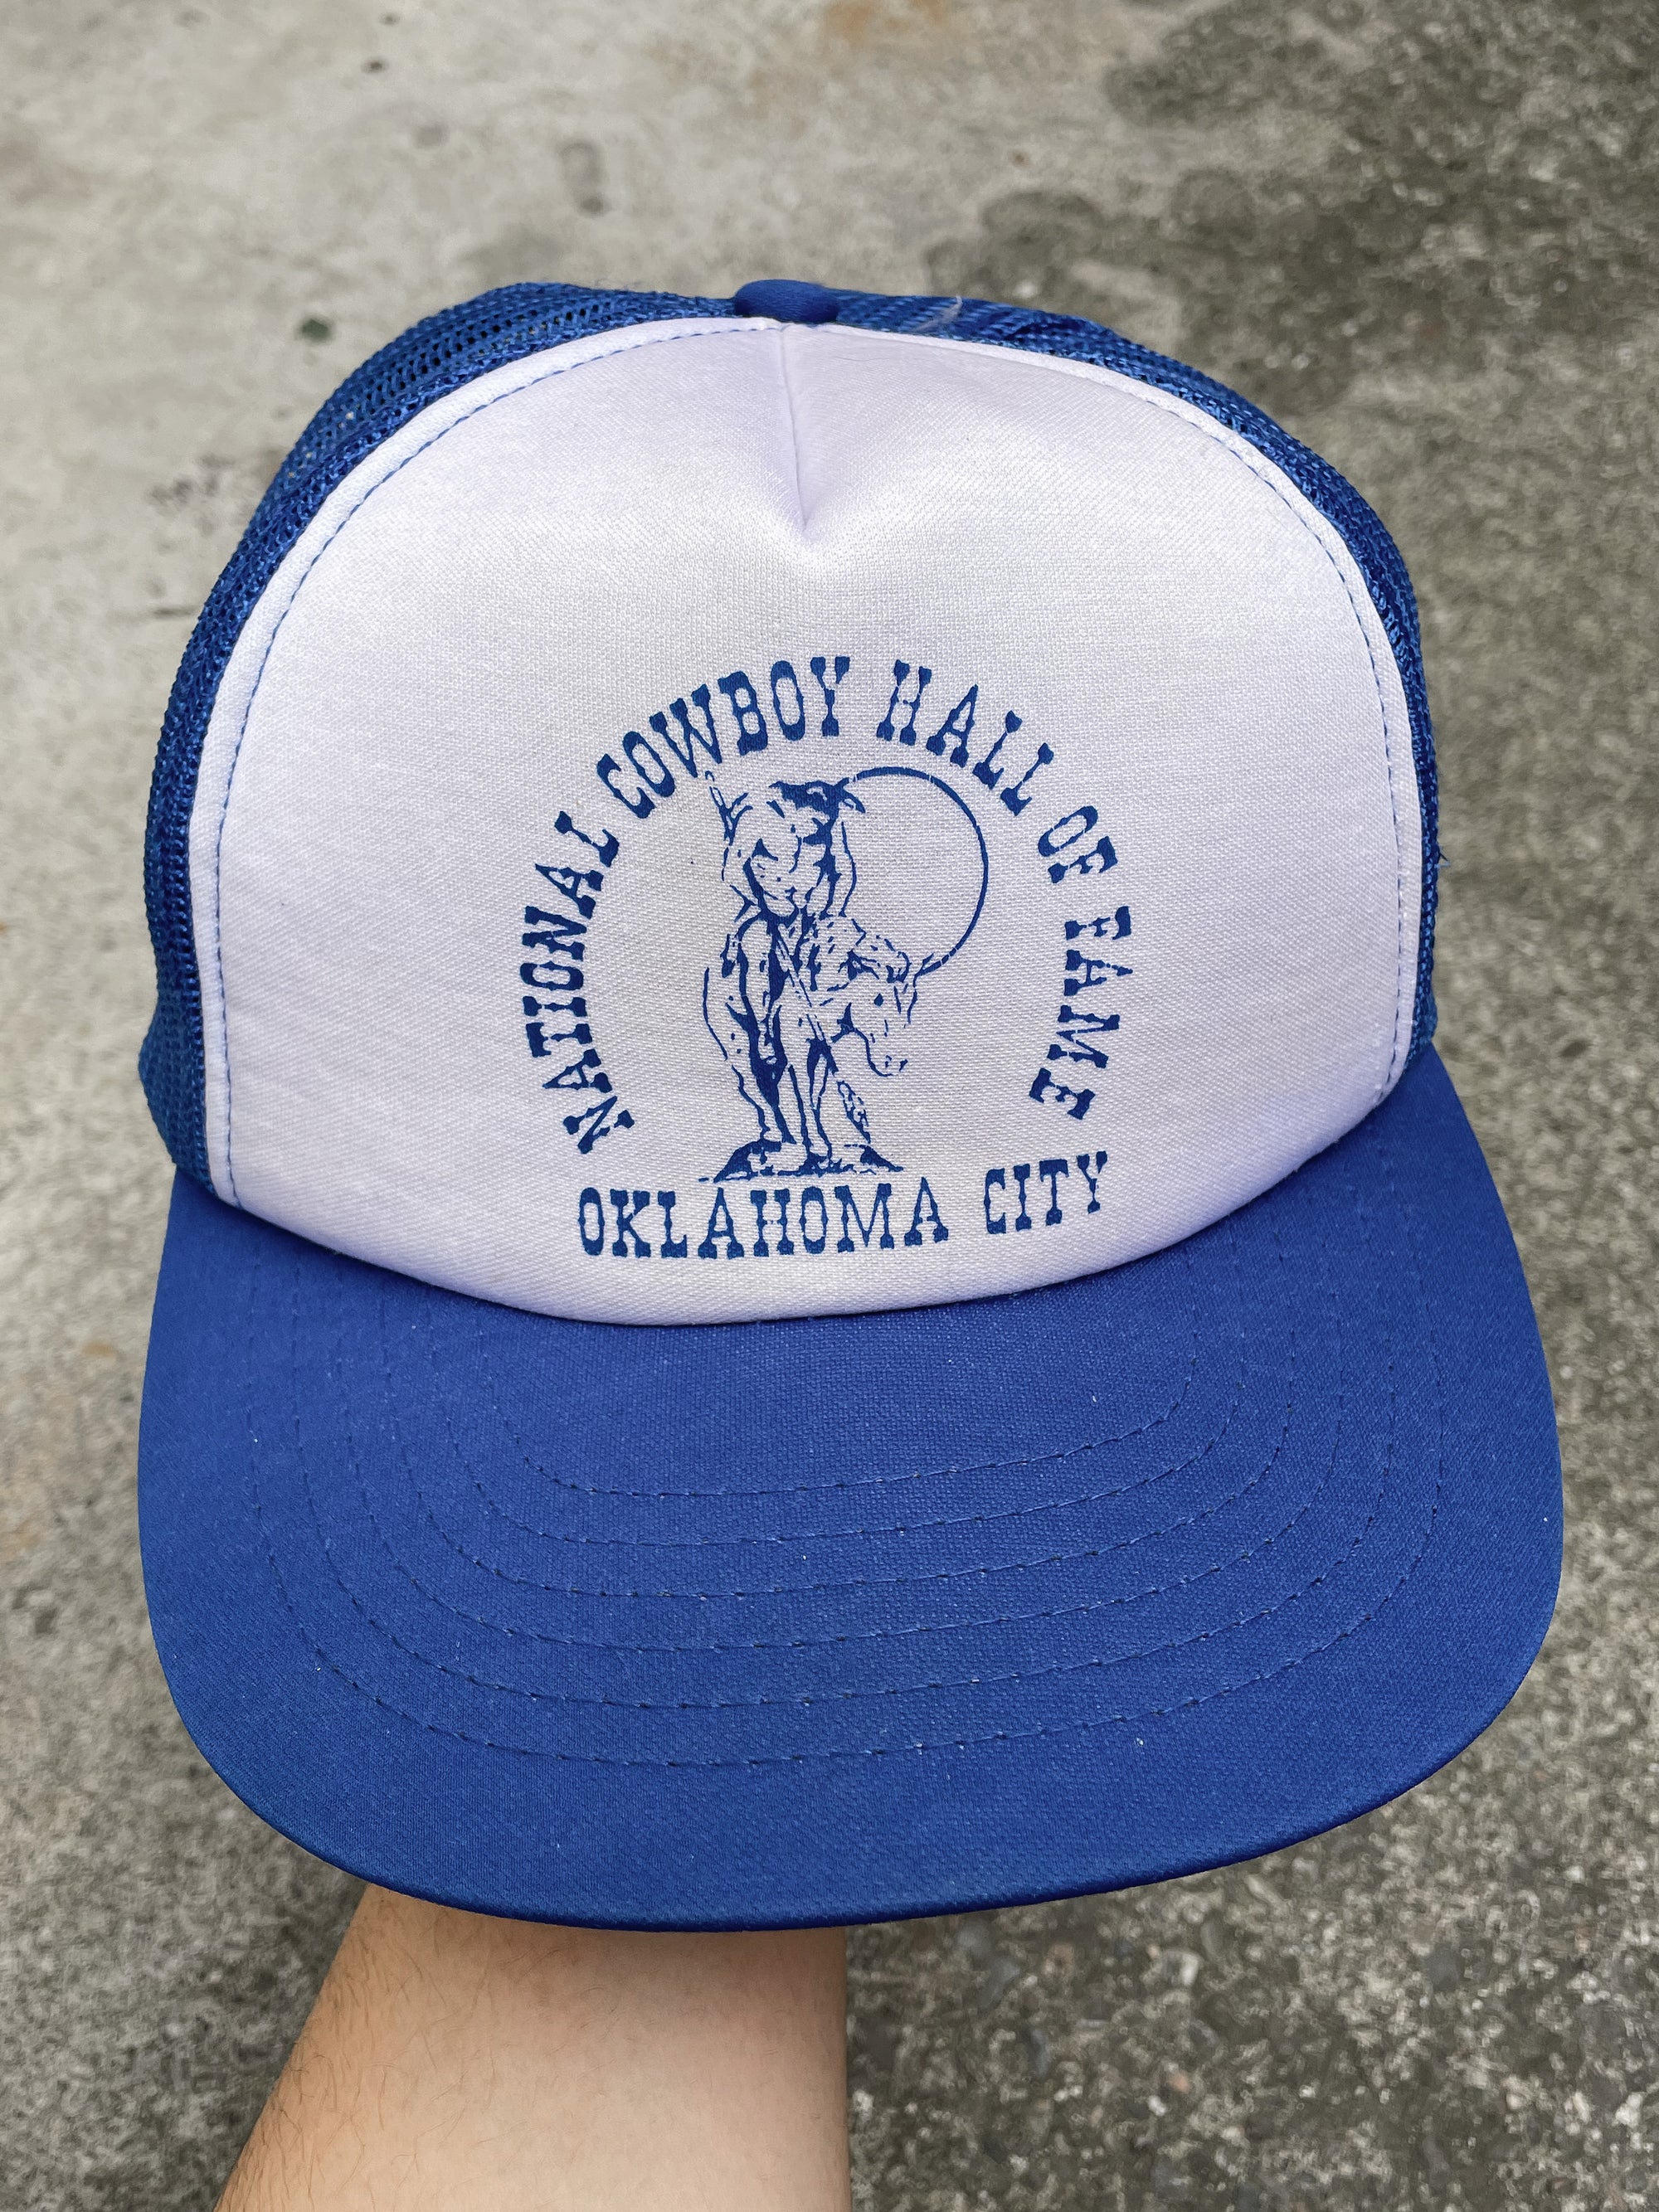 1990s “Cowboy Hall of Fame” Trucker Hat